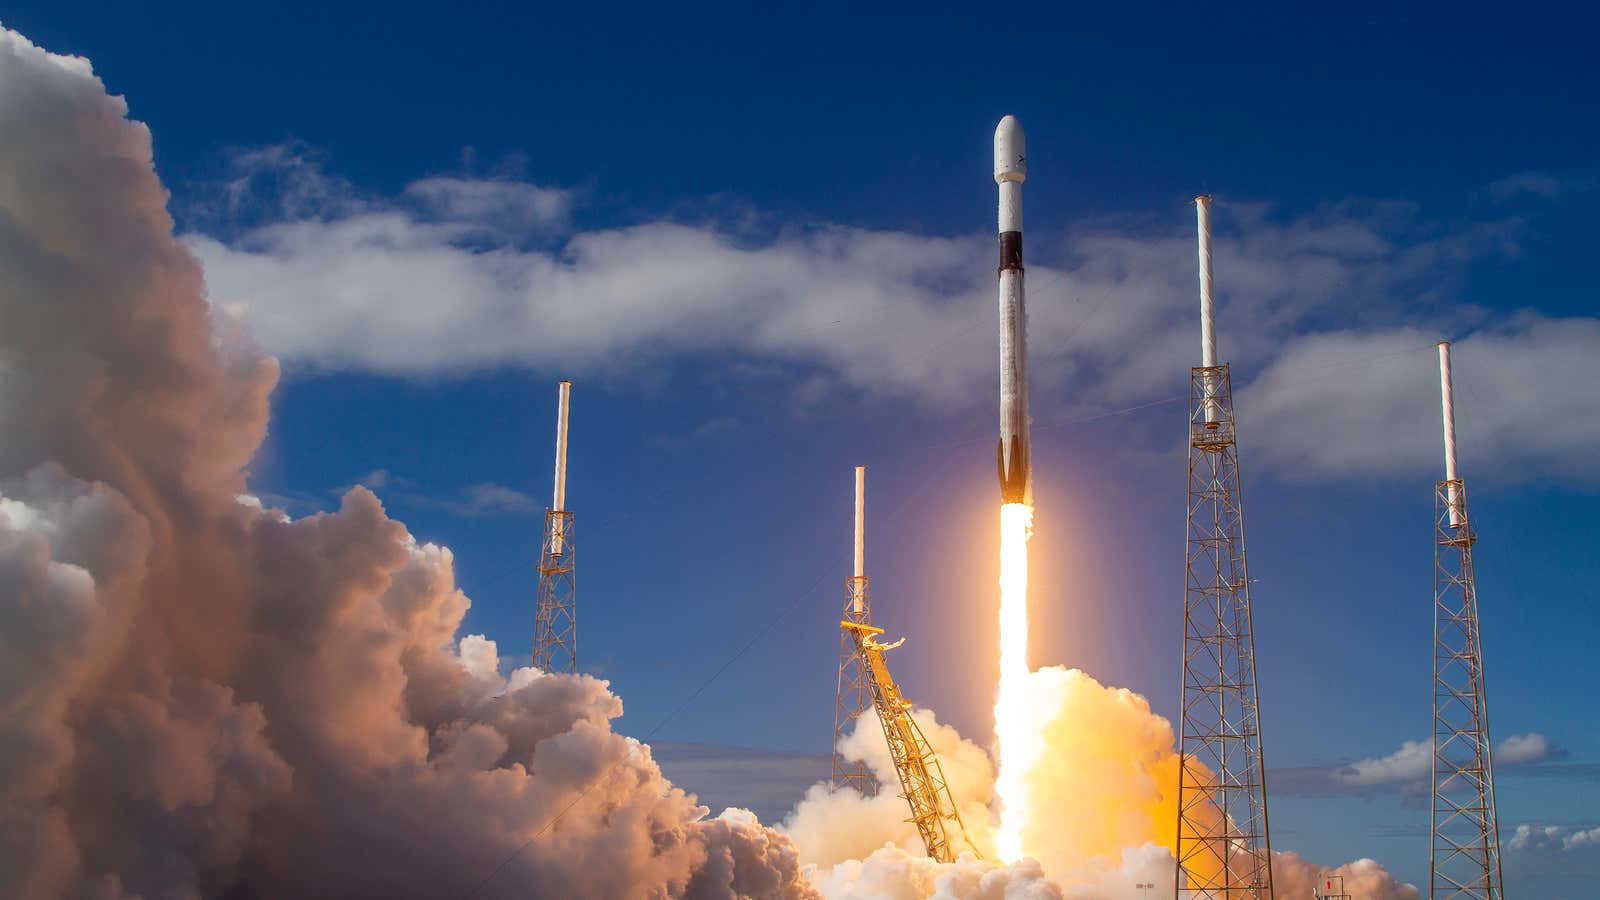 Momentus will piggyback off SpaceX in more ways than one.